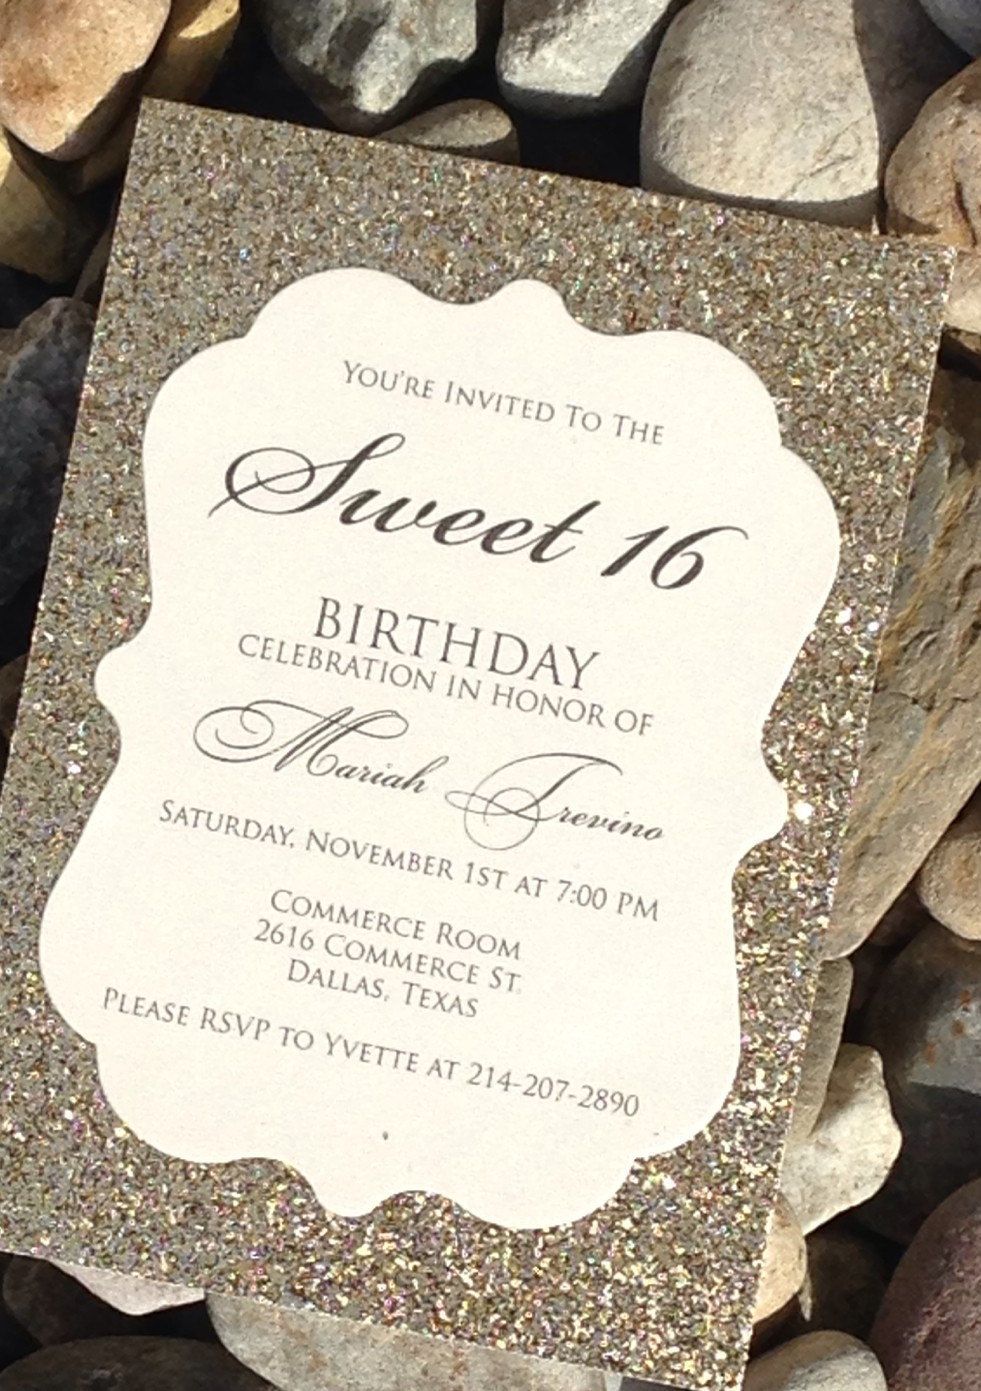 Dazzle your guests with this Gold Glitter invitation..bridal shower instead of sweet 16 of course